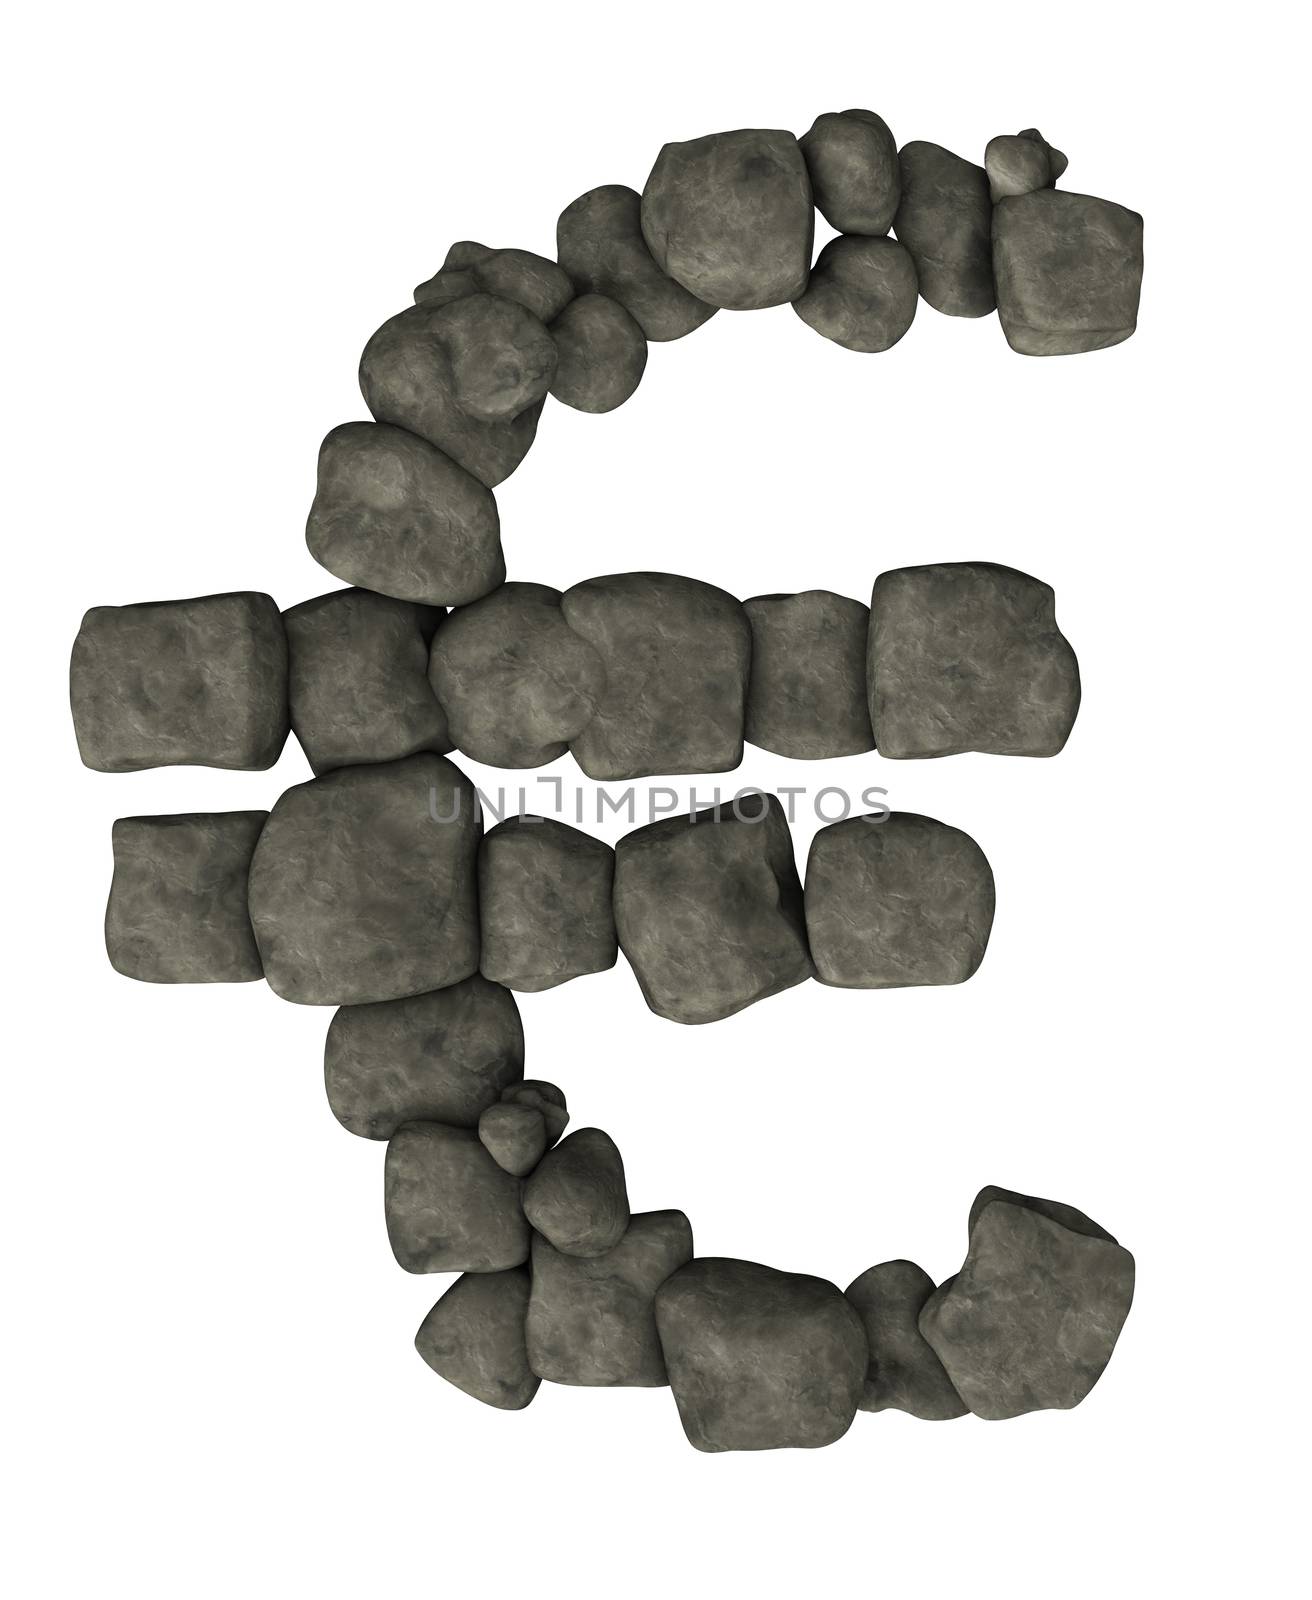 euro symbol made from pebbles on white background - 3d illustration